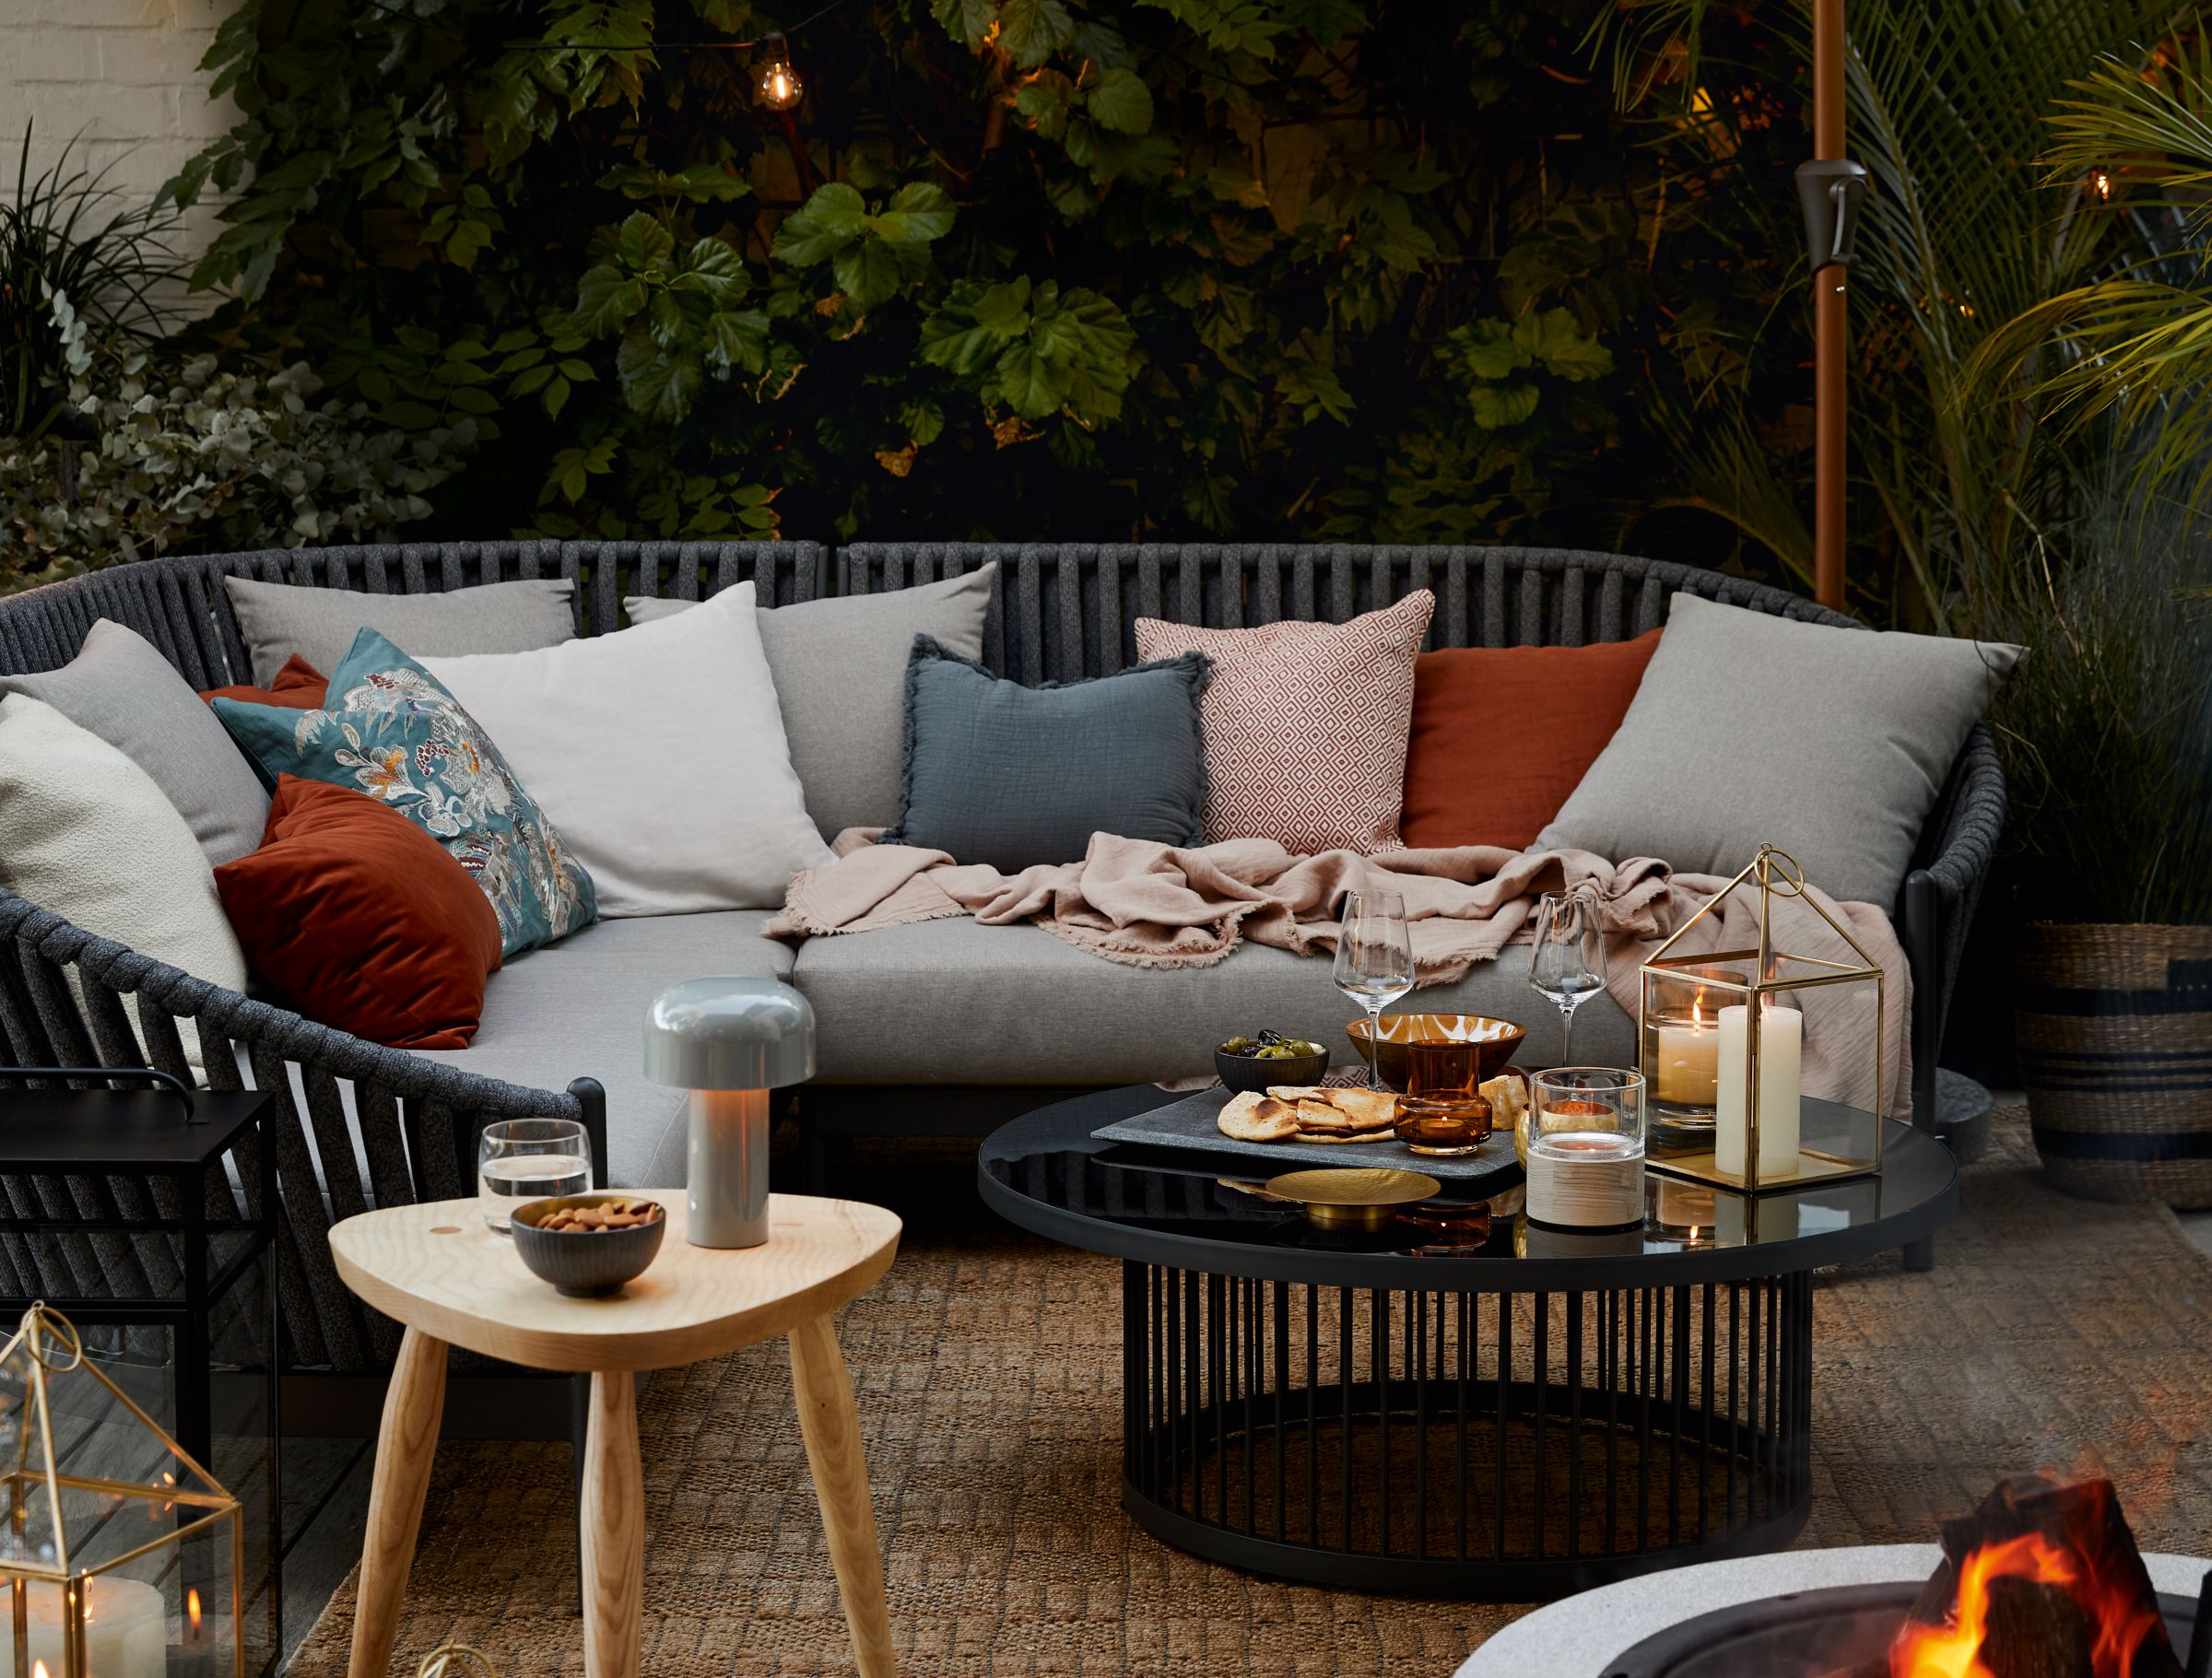 Stylish ideas for an evening get-together outdoors